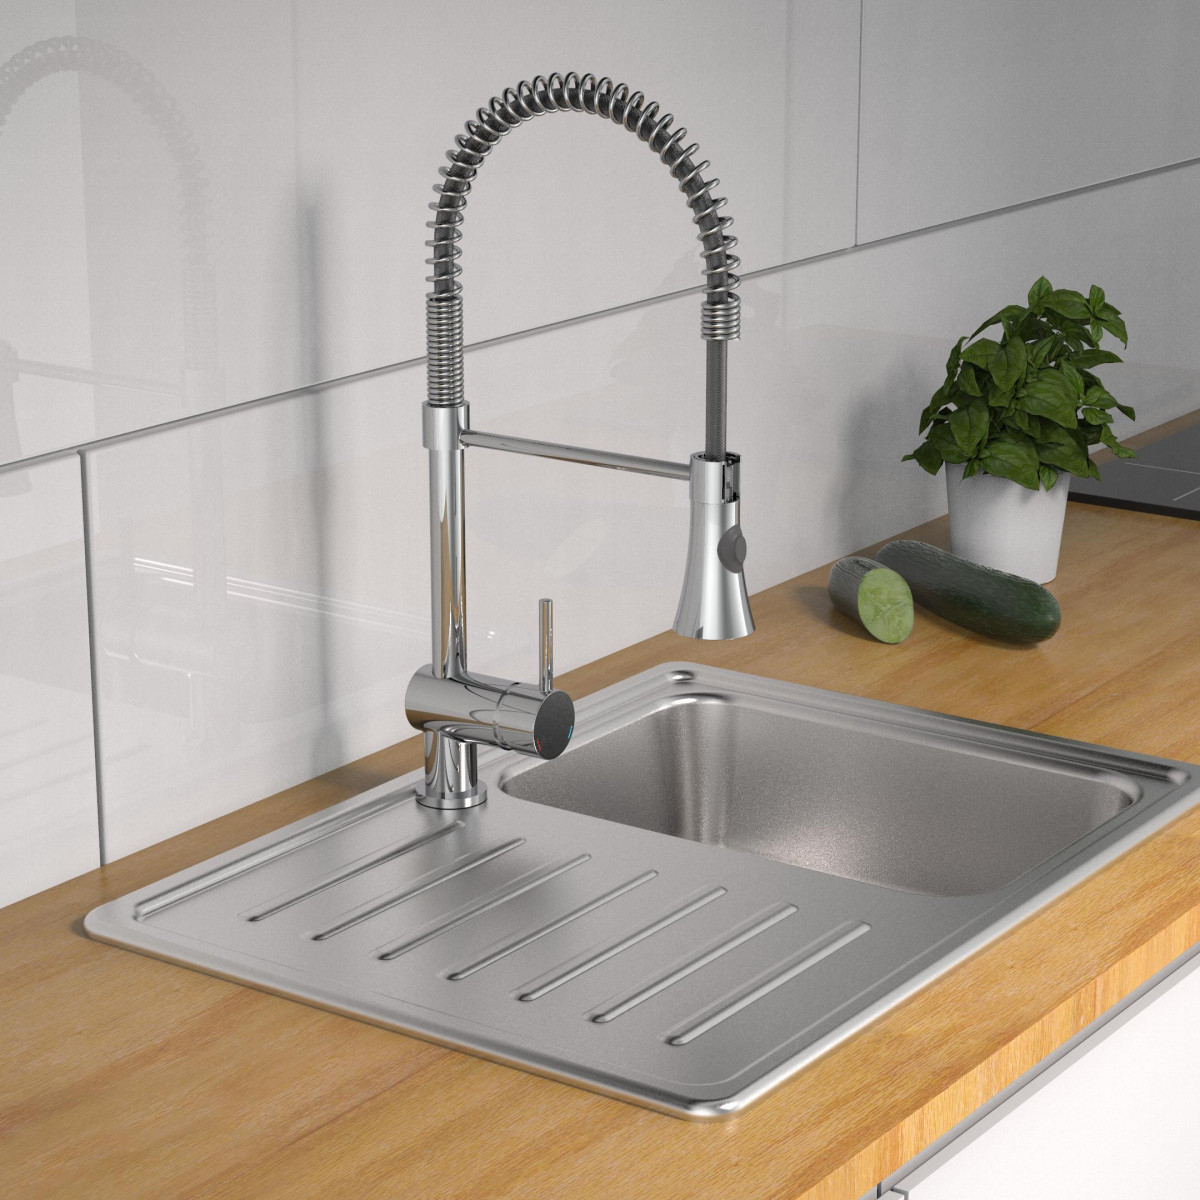 CORNWALL Sink mixer, chrome, with spiral spring